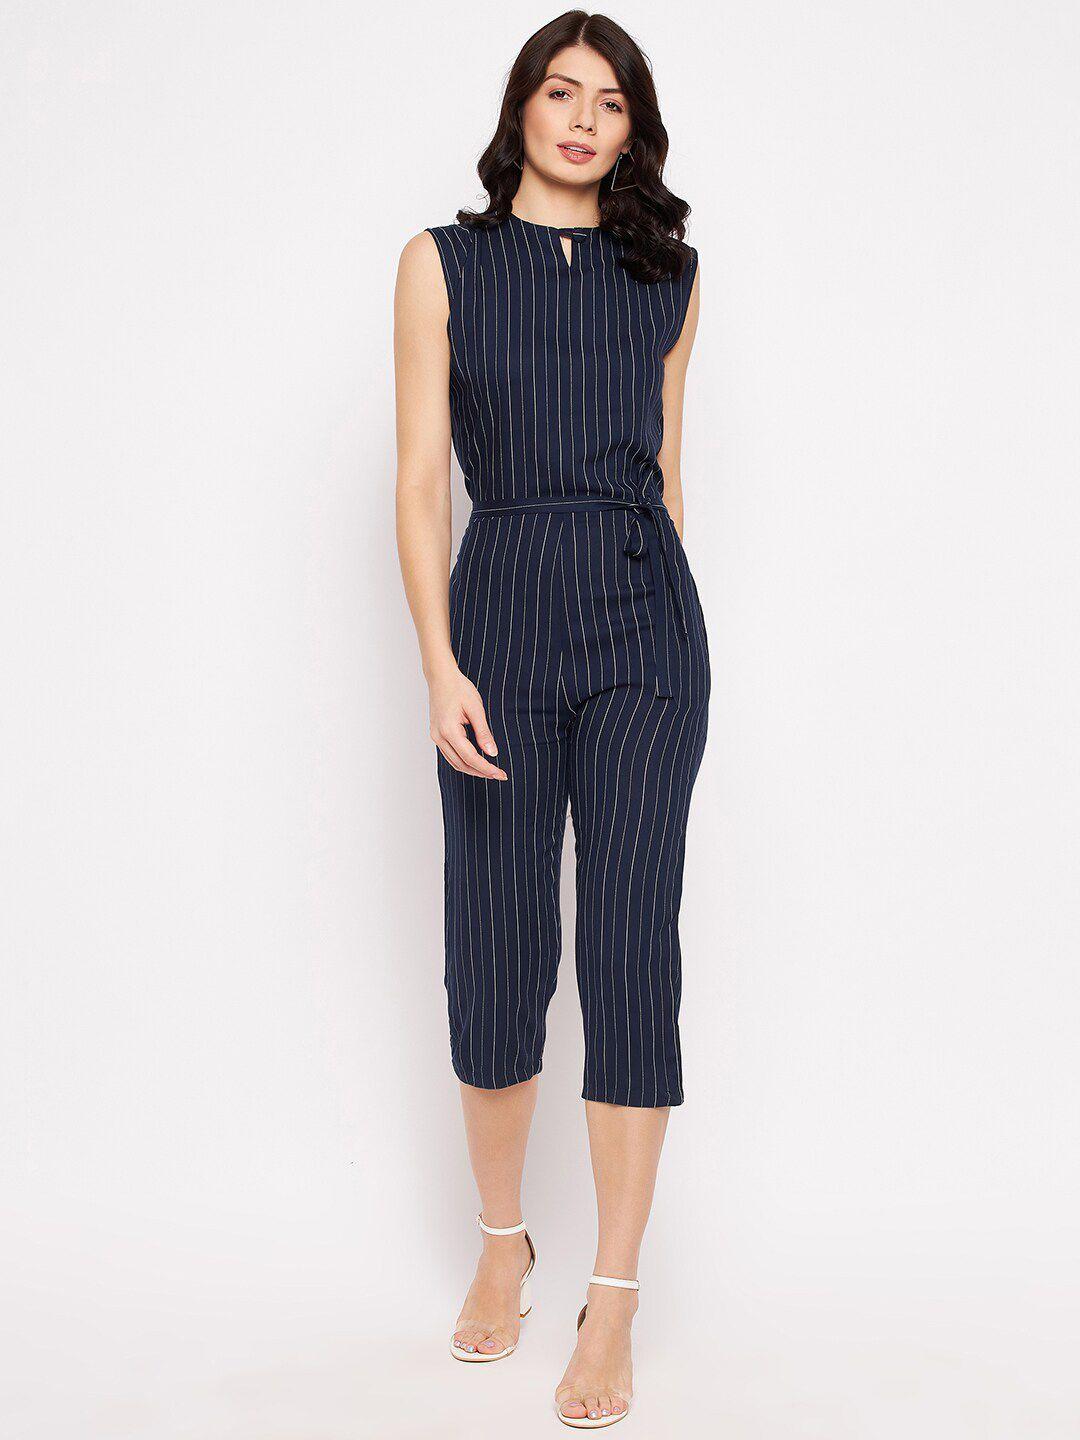 camey women navy blue & white striped culotte crepe sleeveless jumpsuit